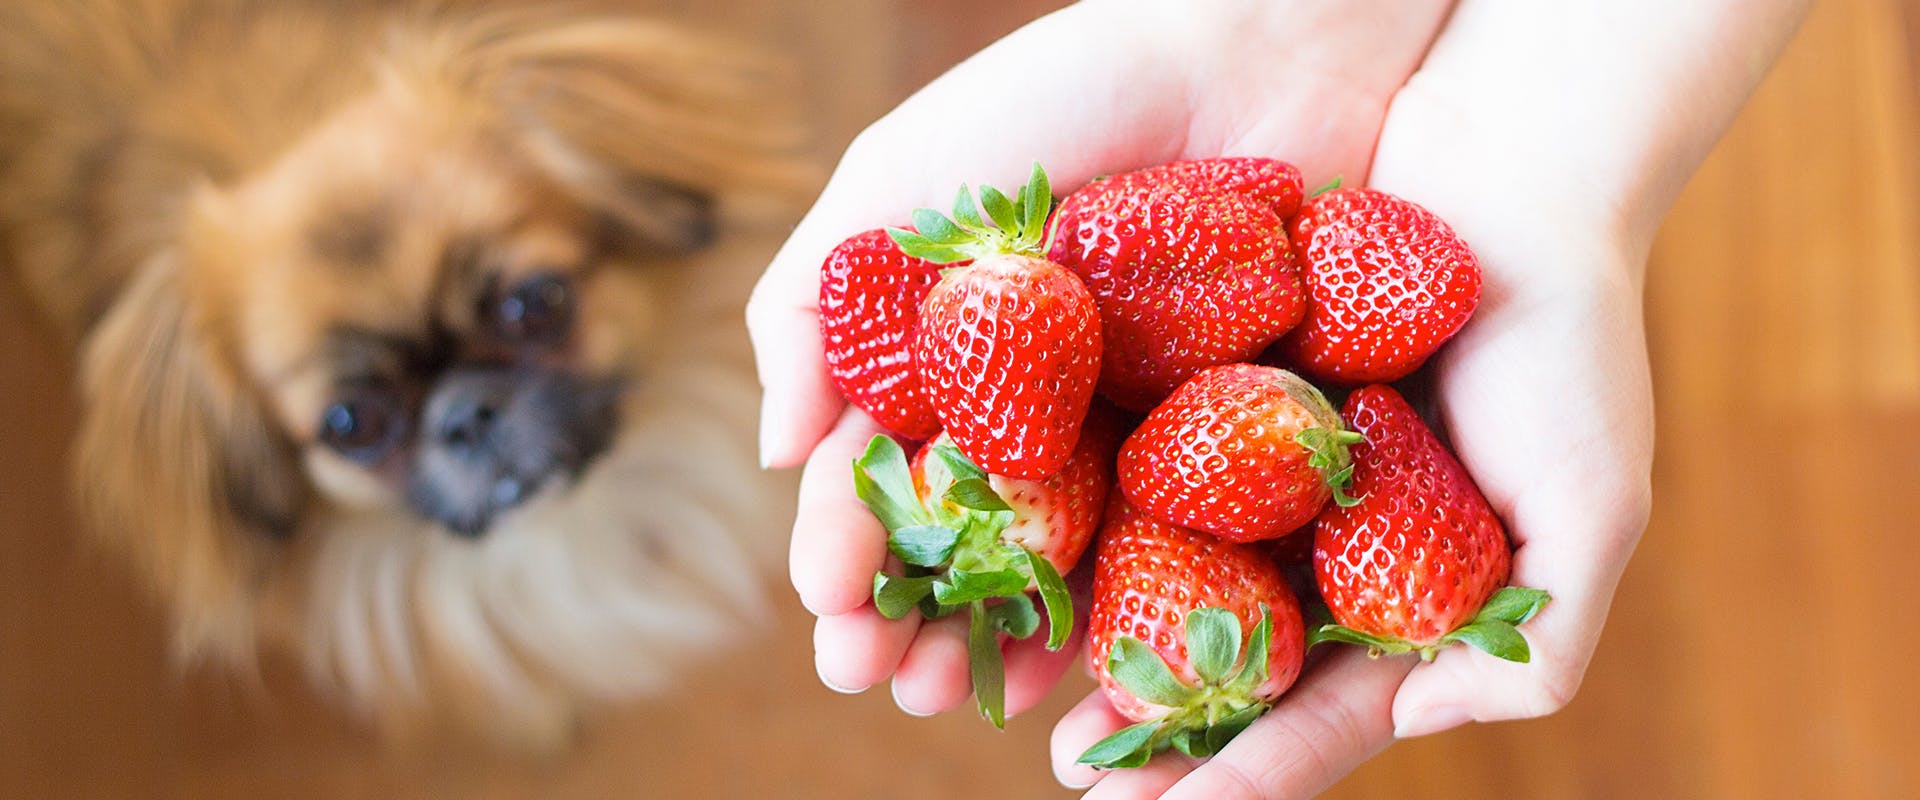 A person holding a handful of strawberries, in the background a dog sits waiting patiently